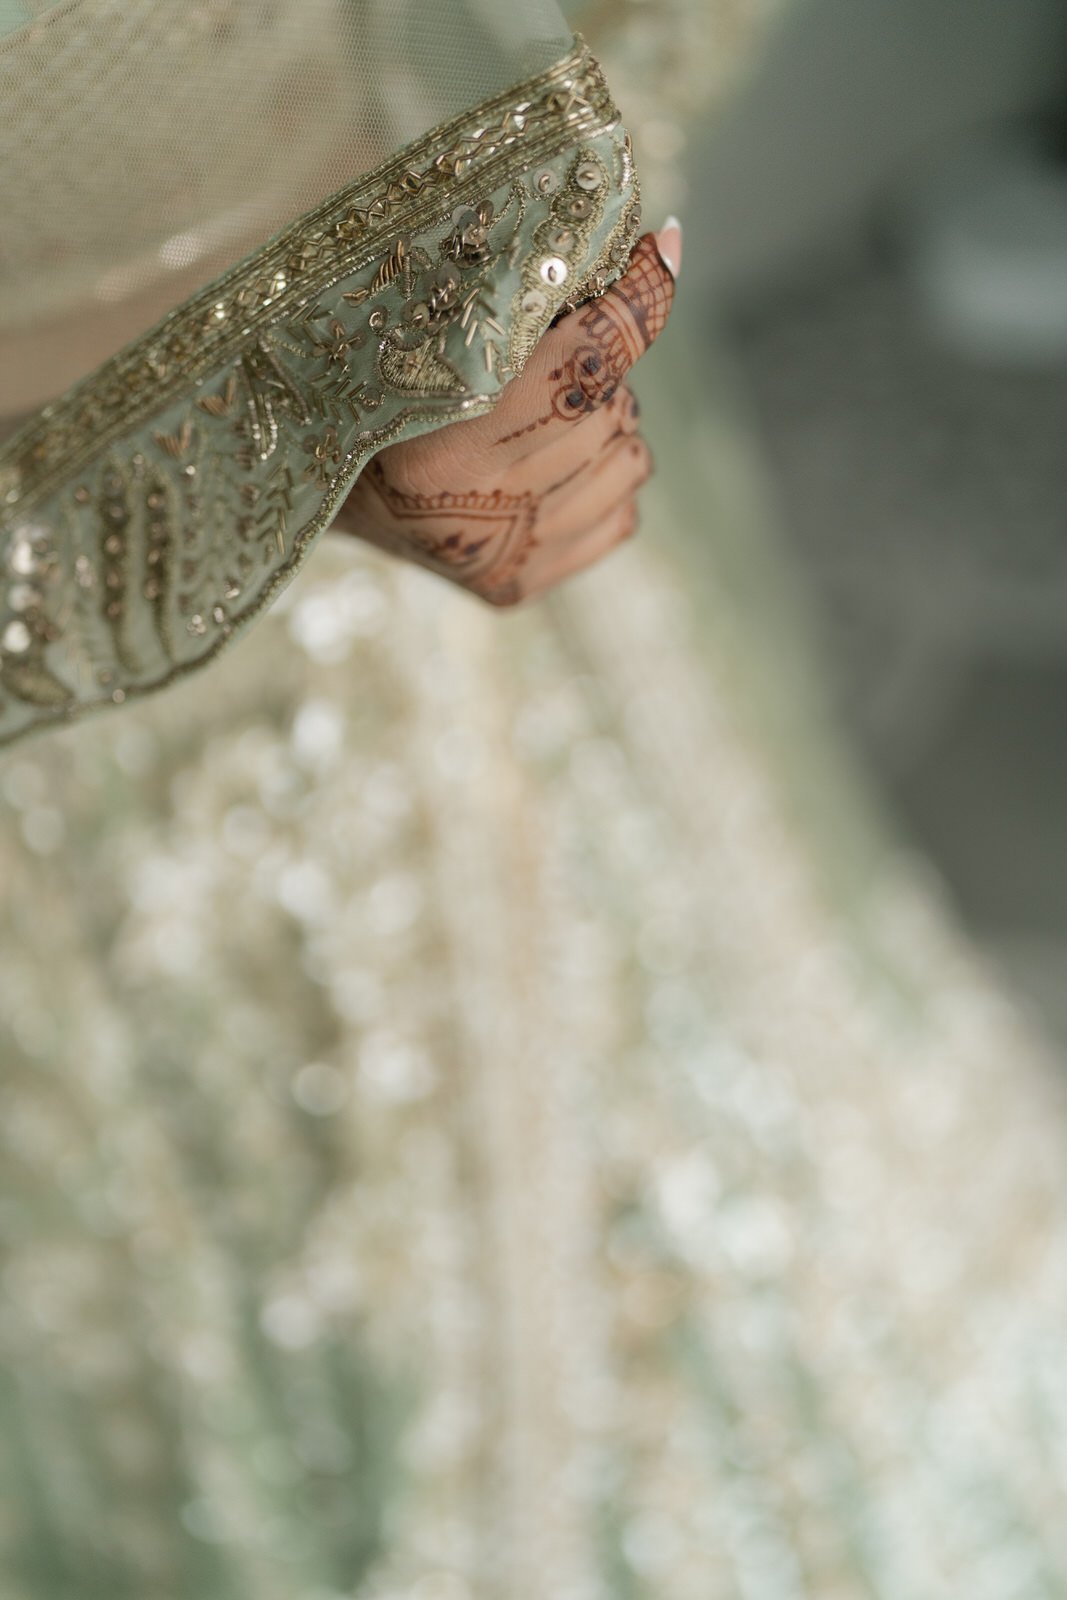 Luxury Indian Wedding in Miami Florida - Indian wedding photographer miami florida - michelle gonzalez photography - loews hotel in coral gables wedding-17.jpg